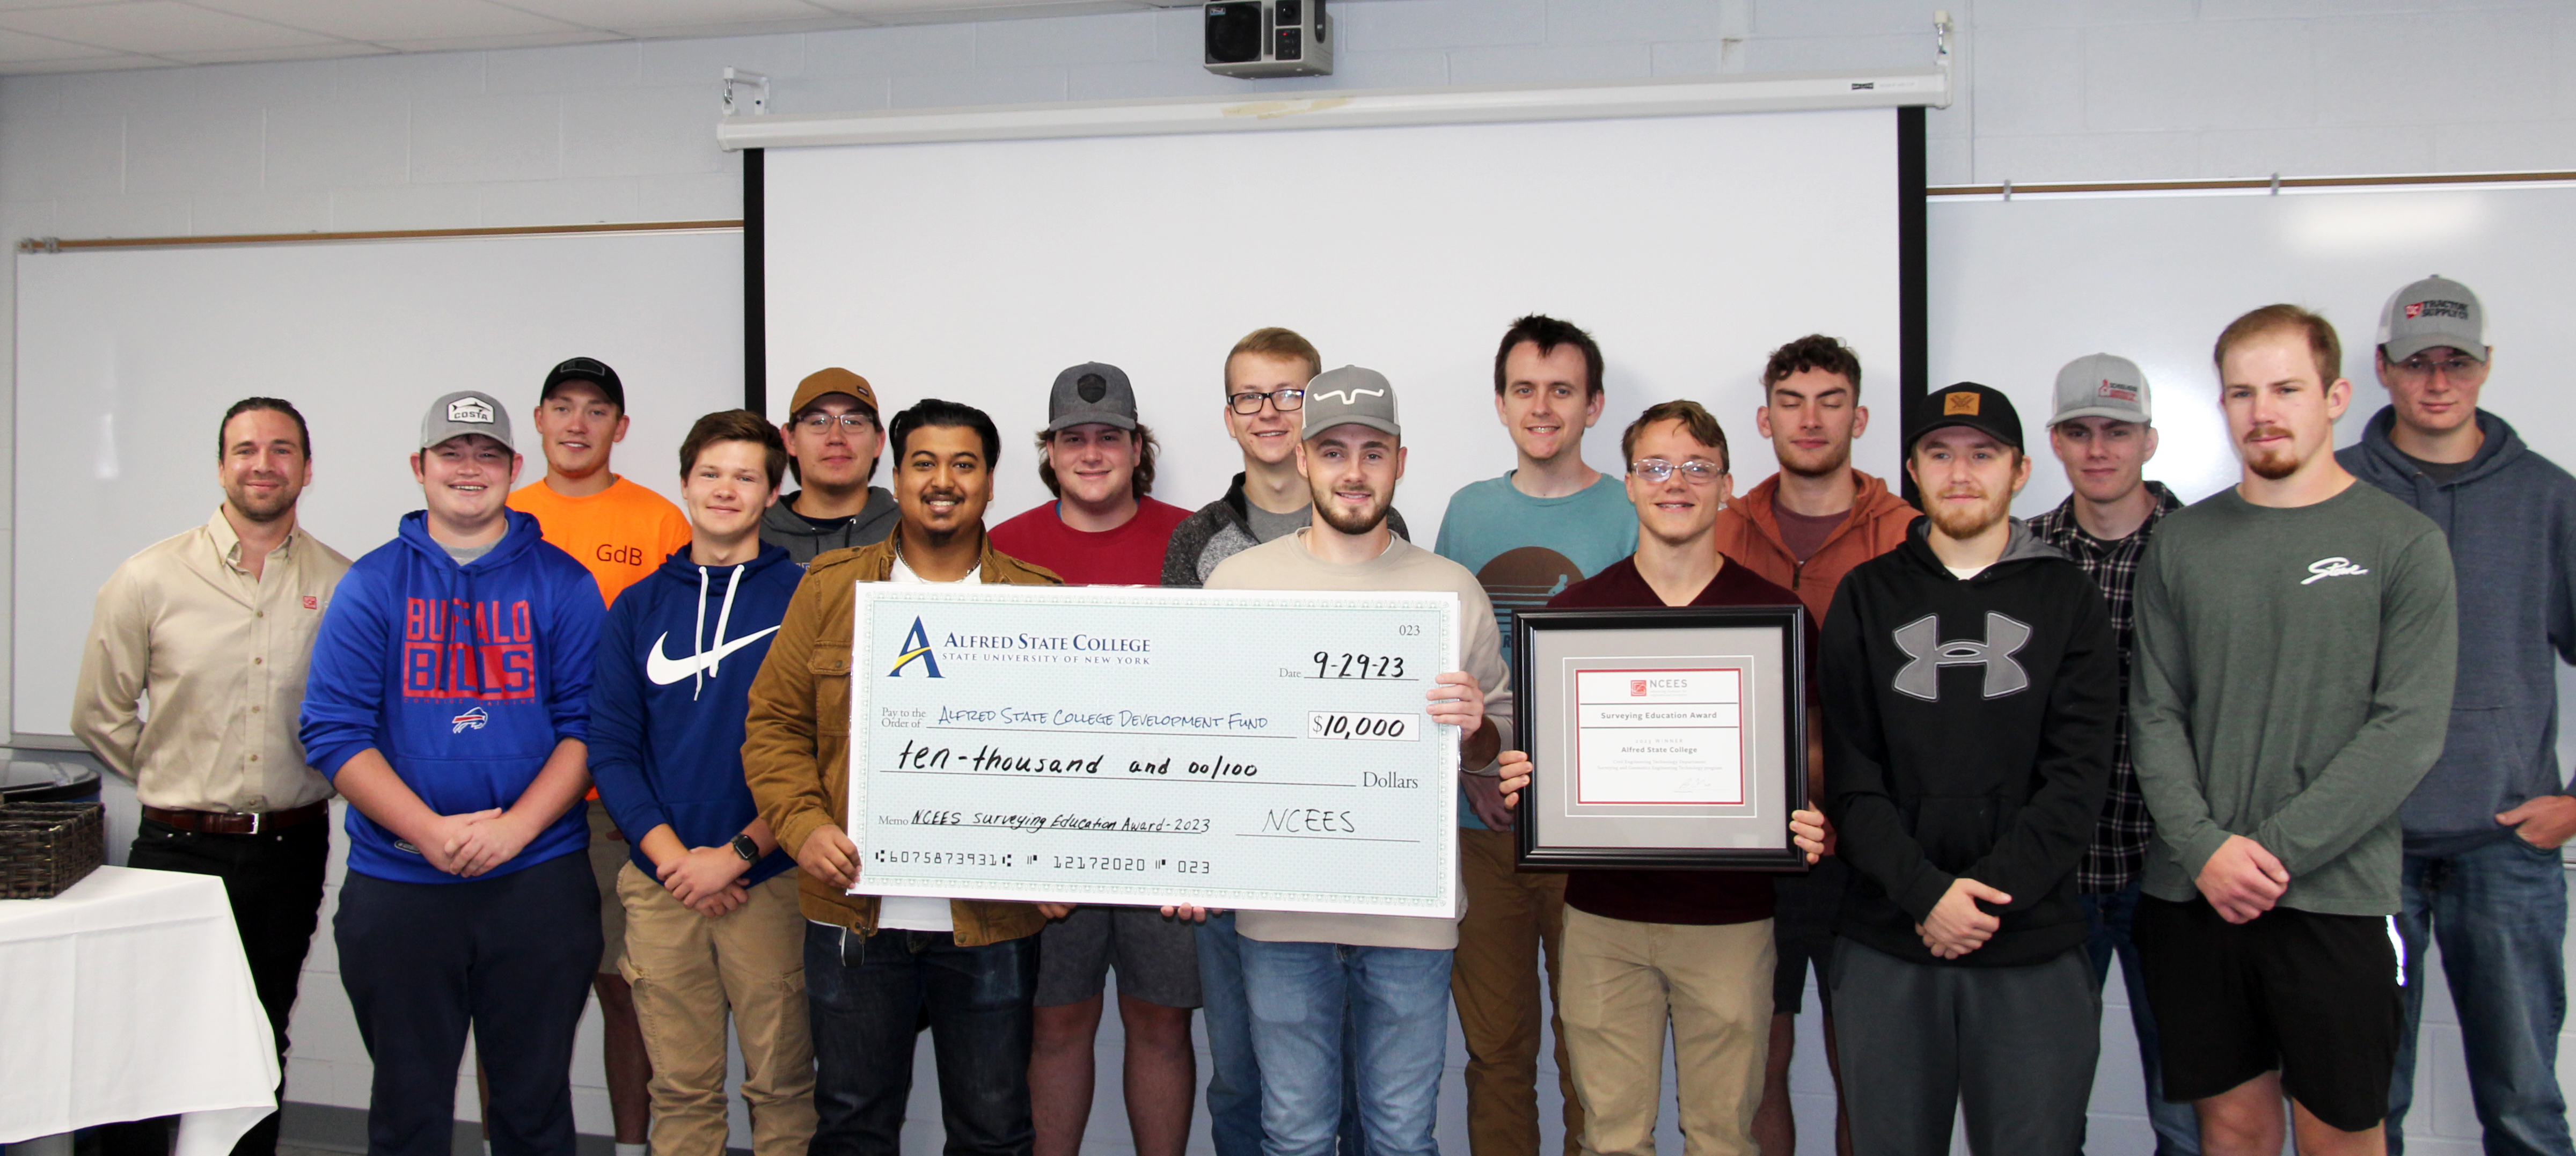 Students pose with the winning check and plaque